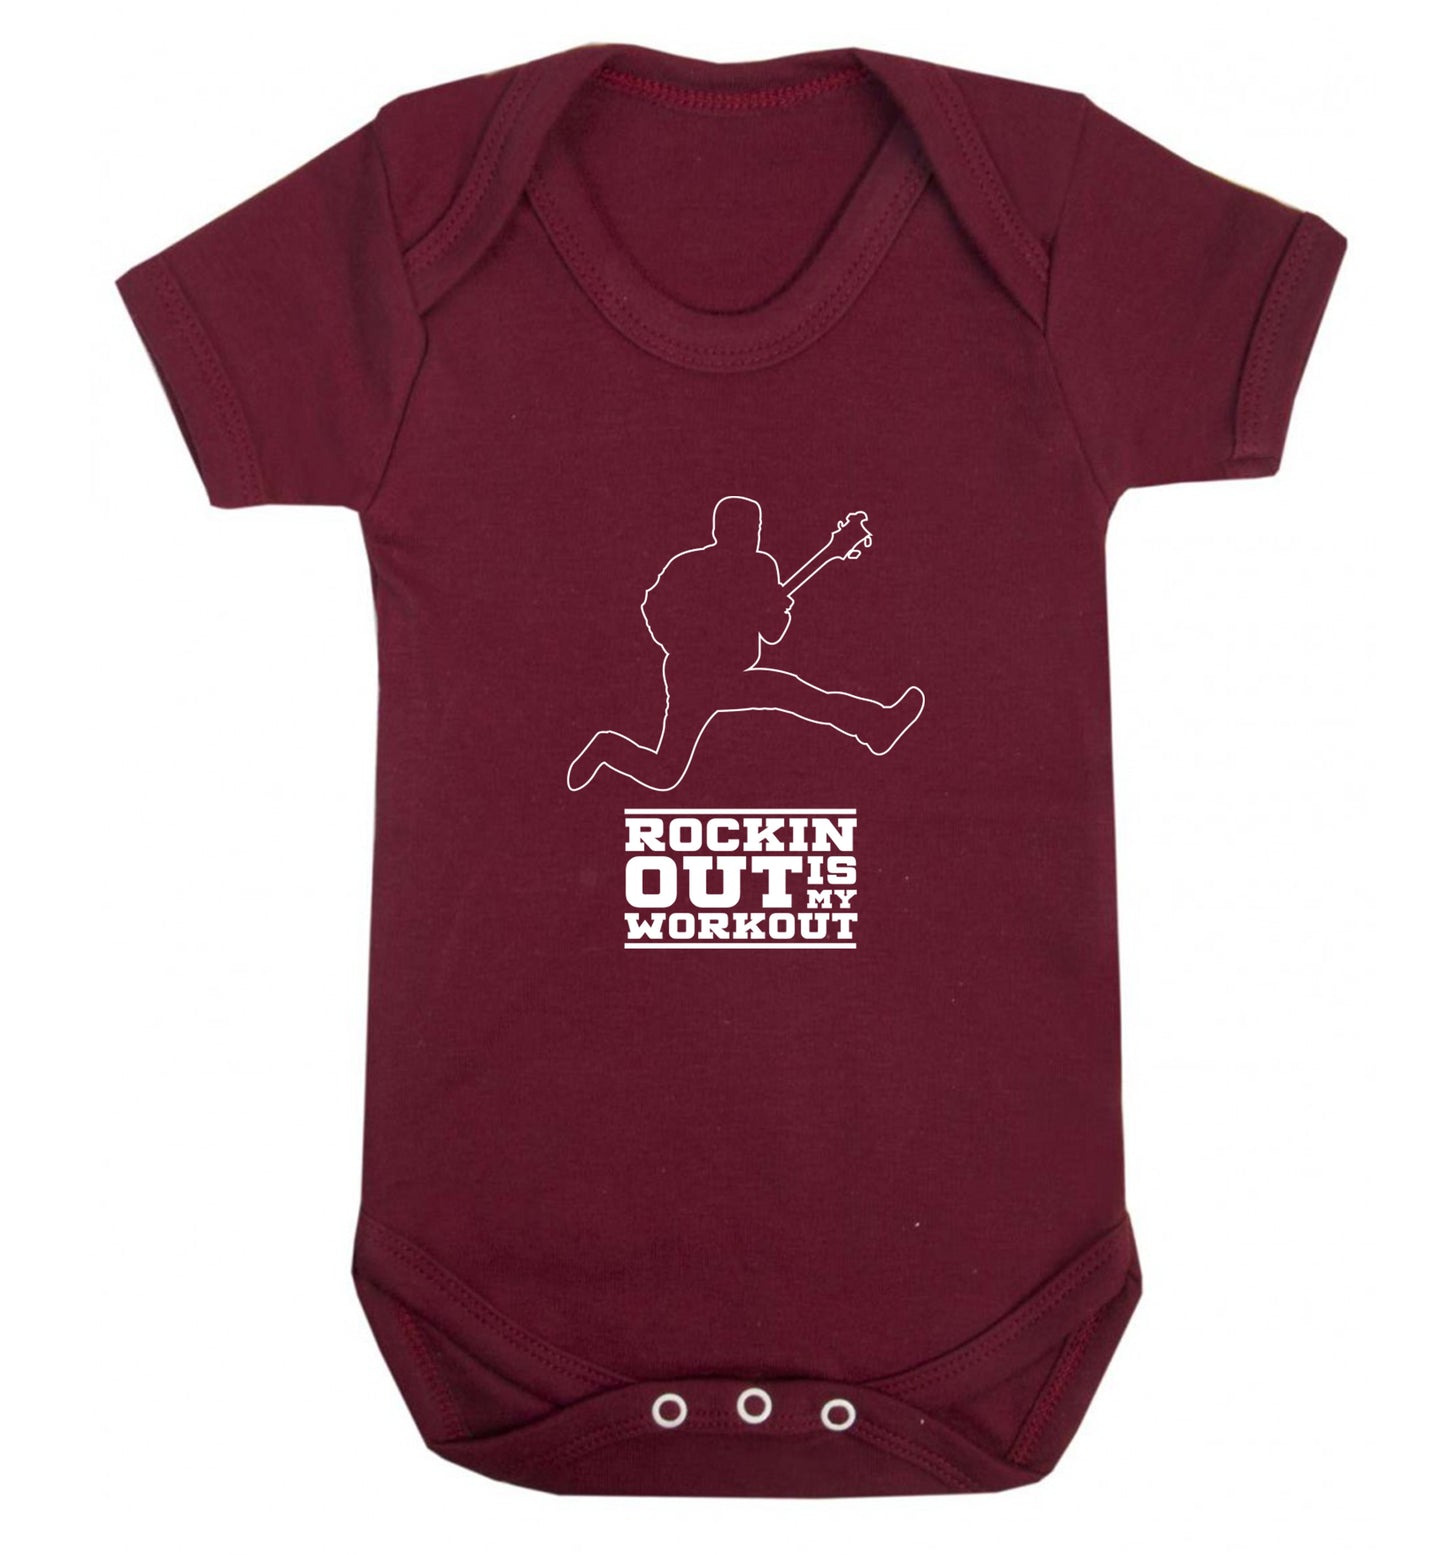 Rockin out is my workout 2 Baby Vest maroon 18-24 months